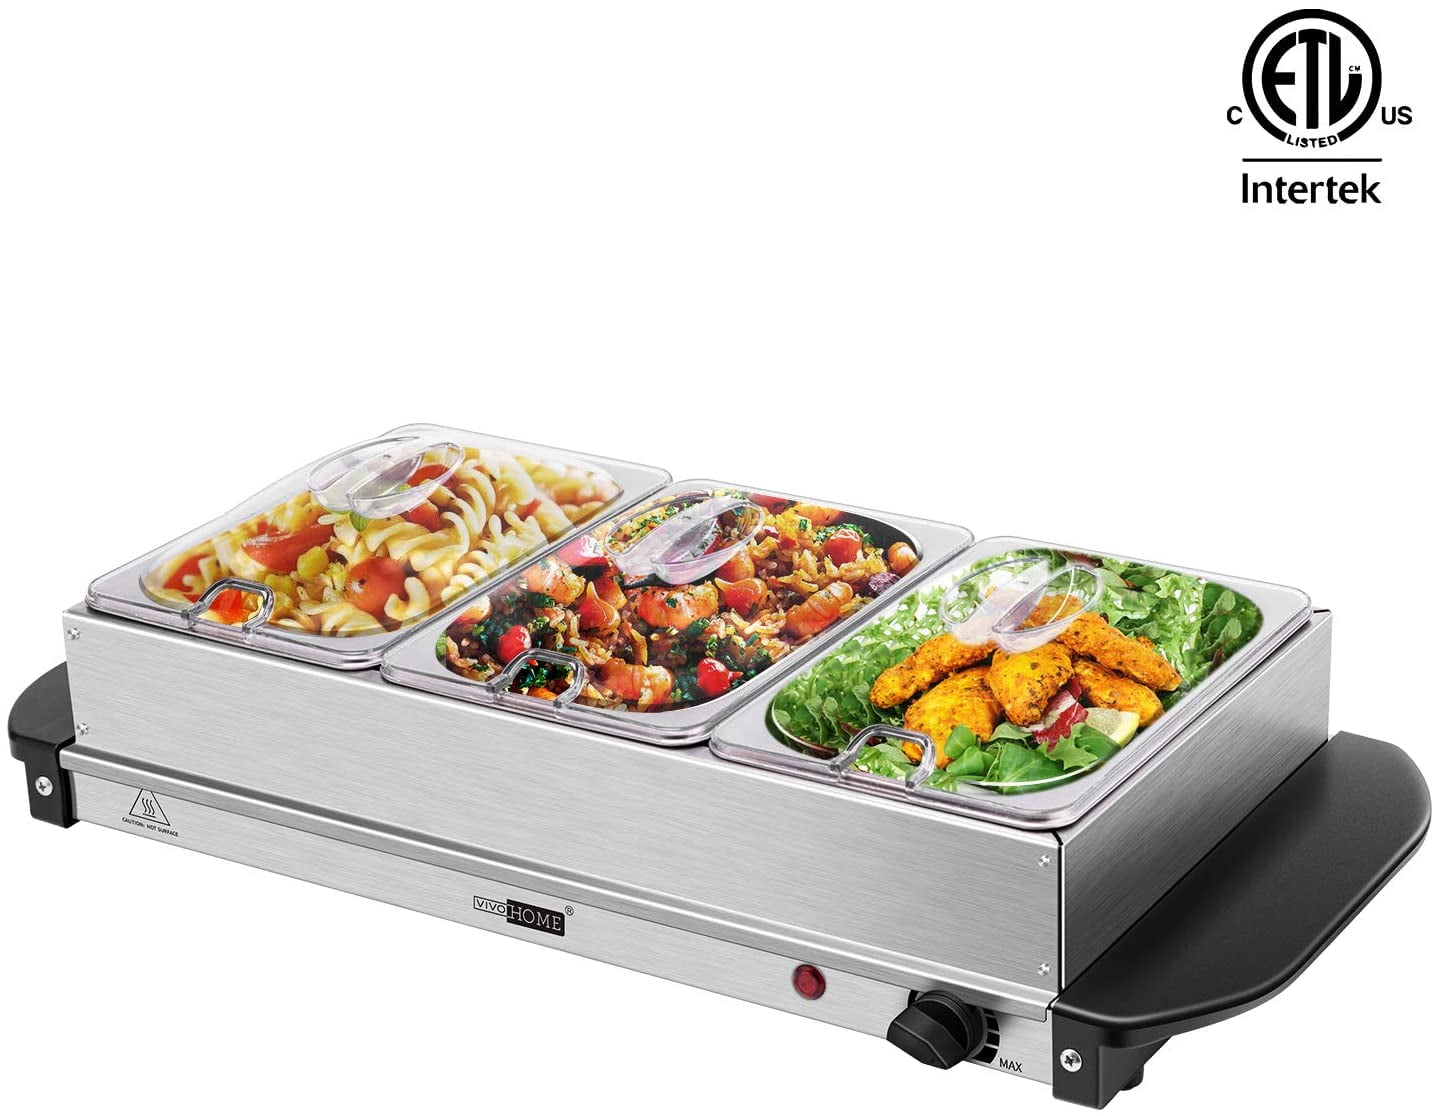 BUFFET SERVER ADJUSTABLE TEMPERATURE 200W  HOT PLATE TRAY S/S STEEL FOOD WARMER 